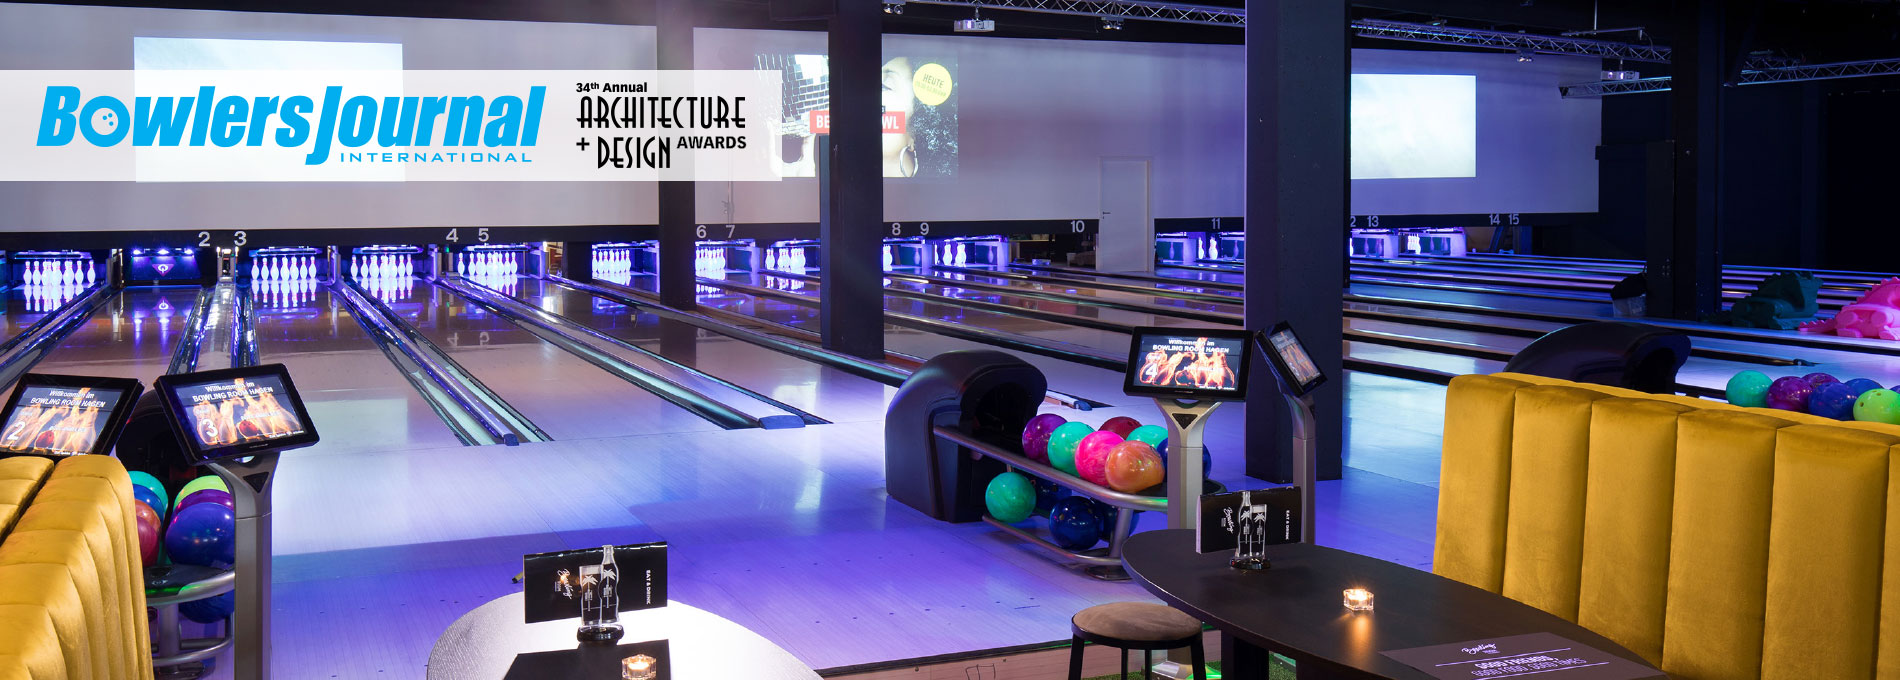 qubicaamf-bowling-34th-architecture-and-design-awards-banner-bowling-room-hager-germany